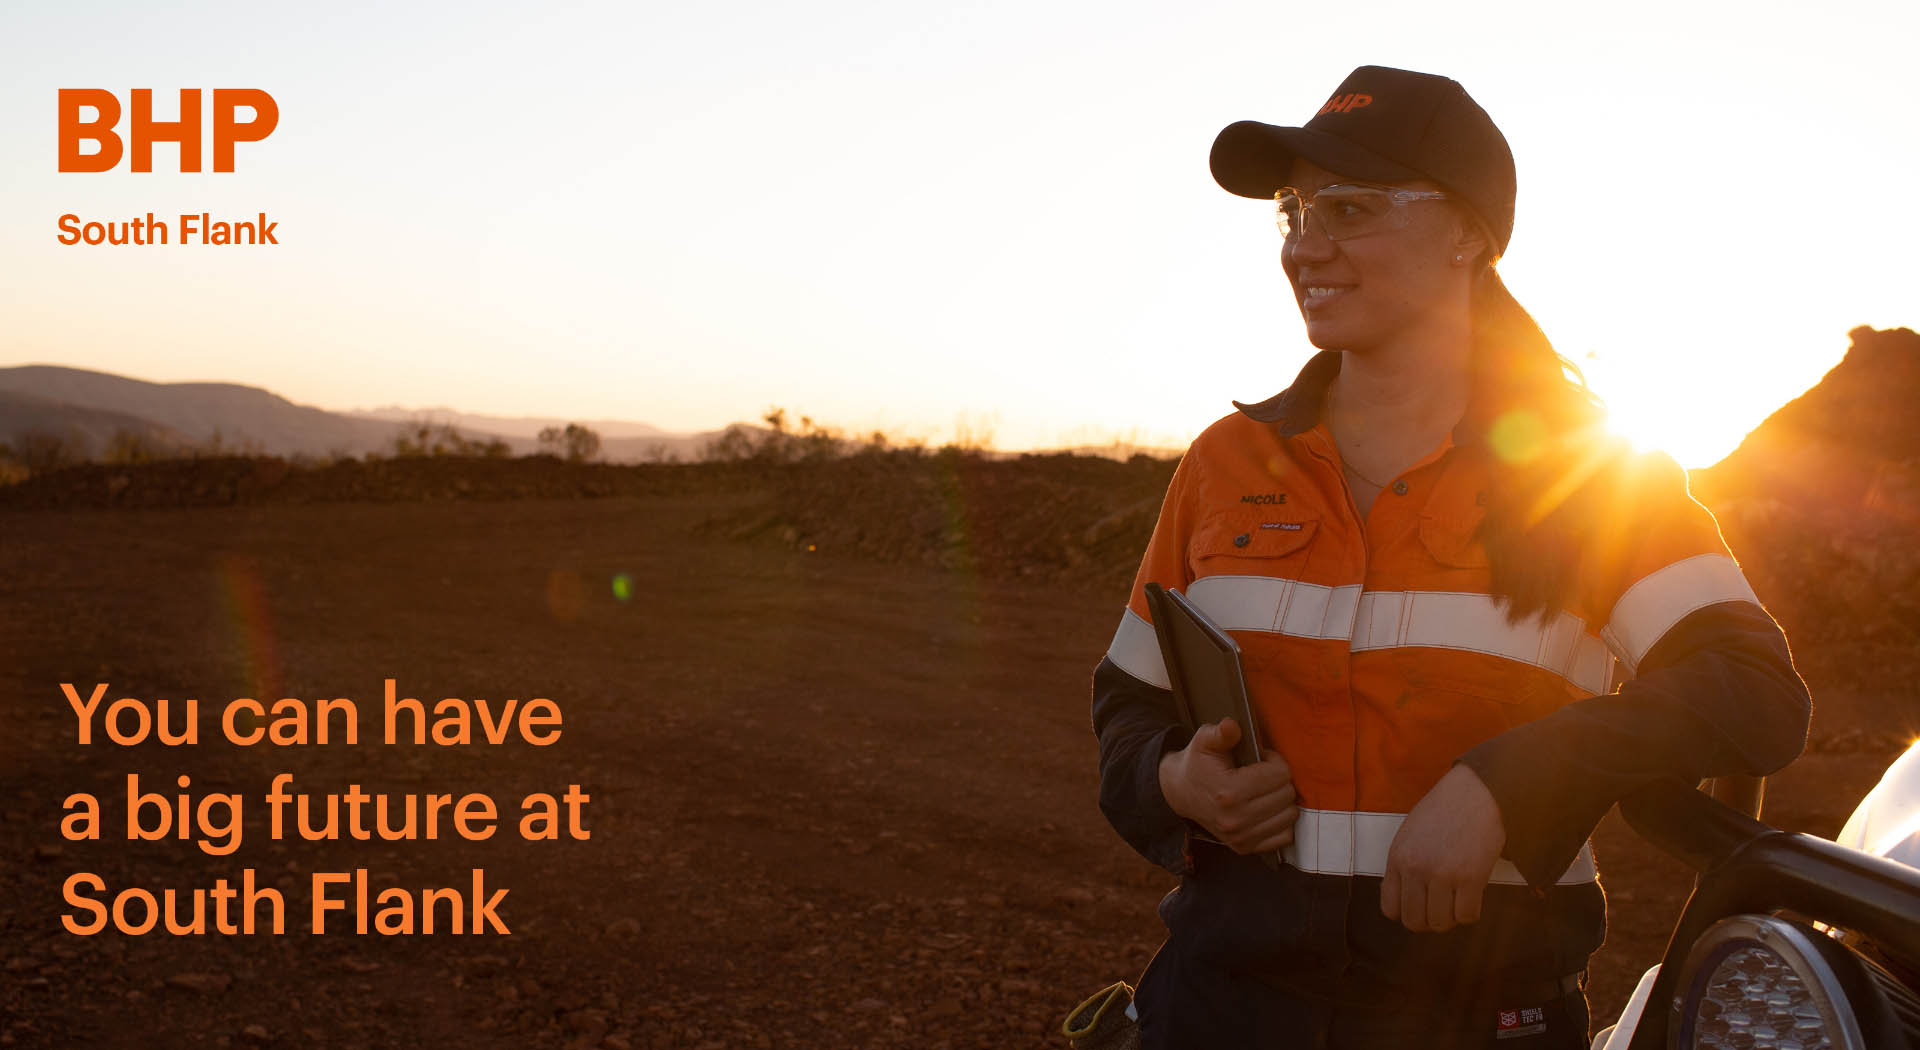 Key image showing a women wearing BHP branded hi-vis gear on a mine site at sunrise.